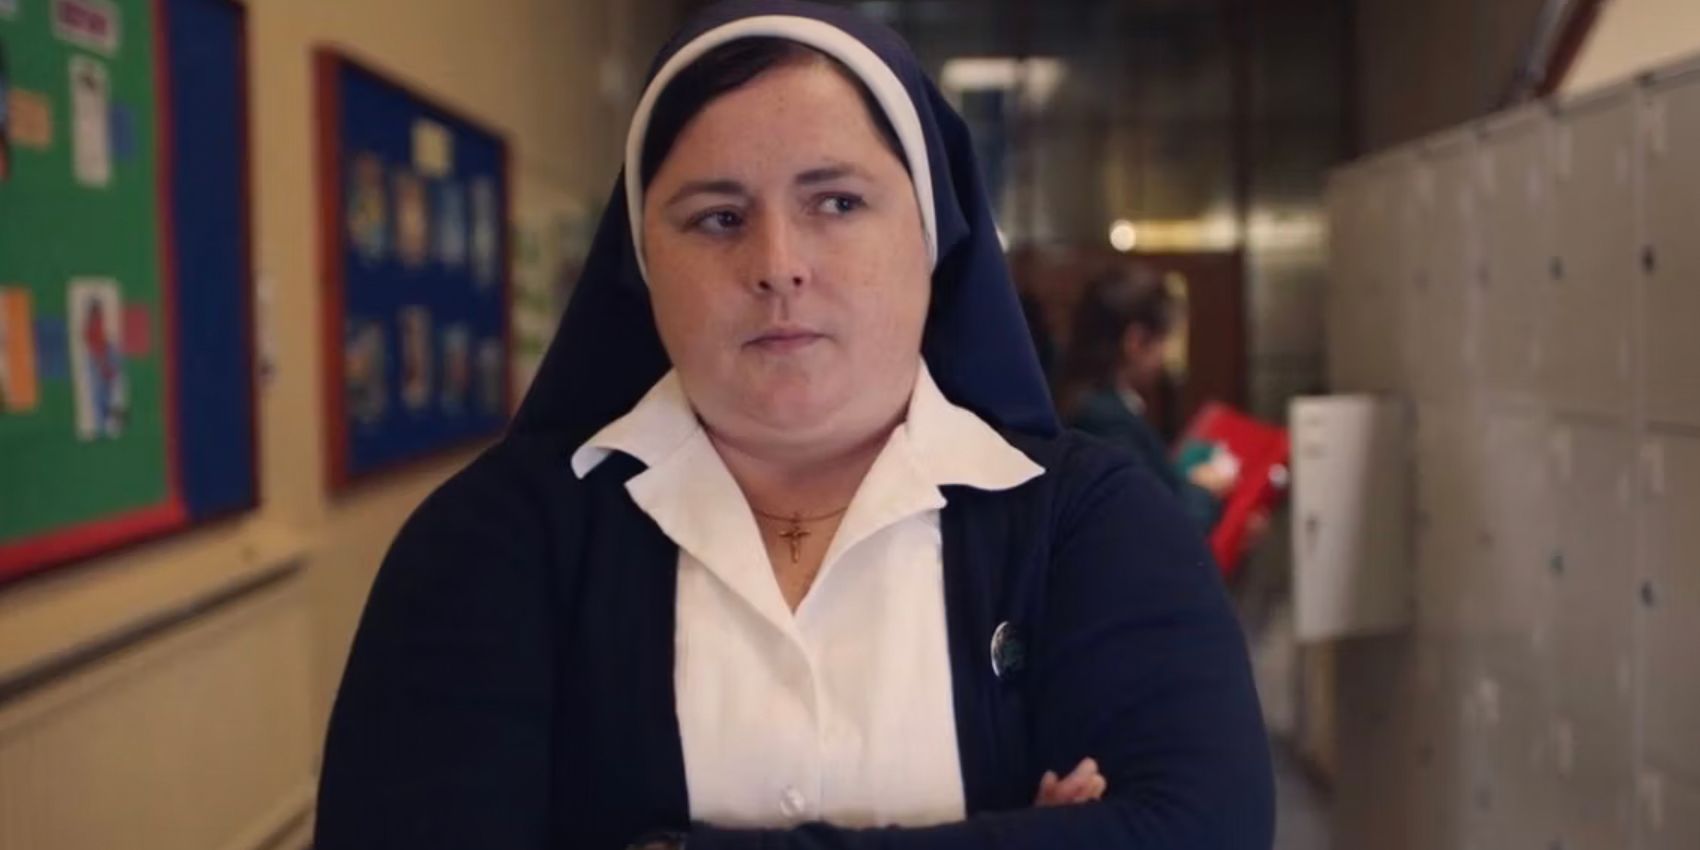 Sister Michael crosses her arms in the hallway at school in Derry Girls